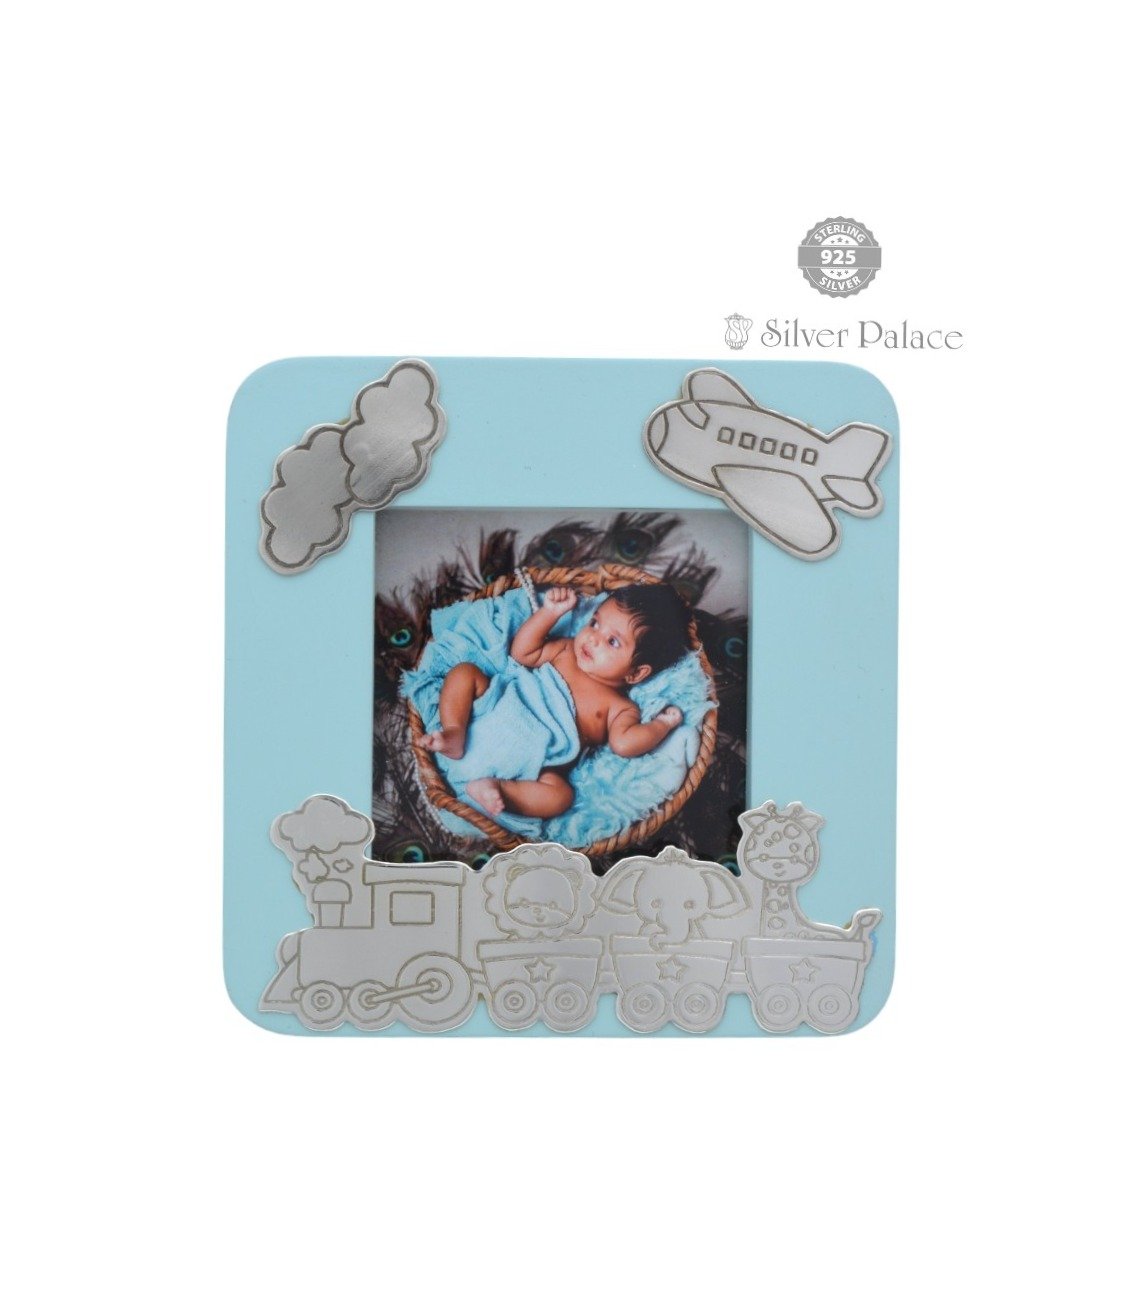 Pure Silver Baby Photo Frame For Gifts Uses